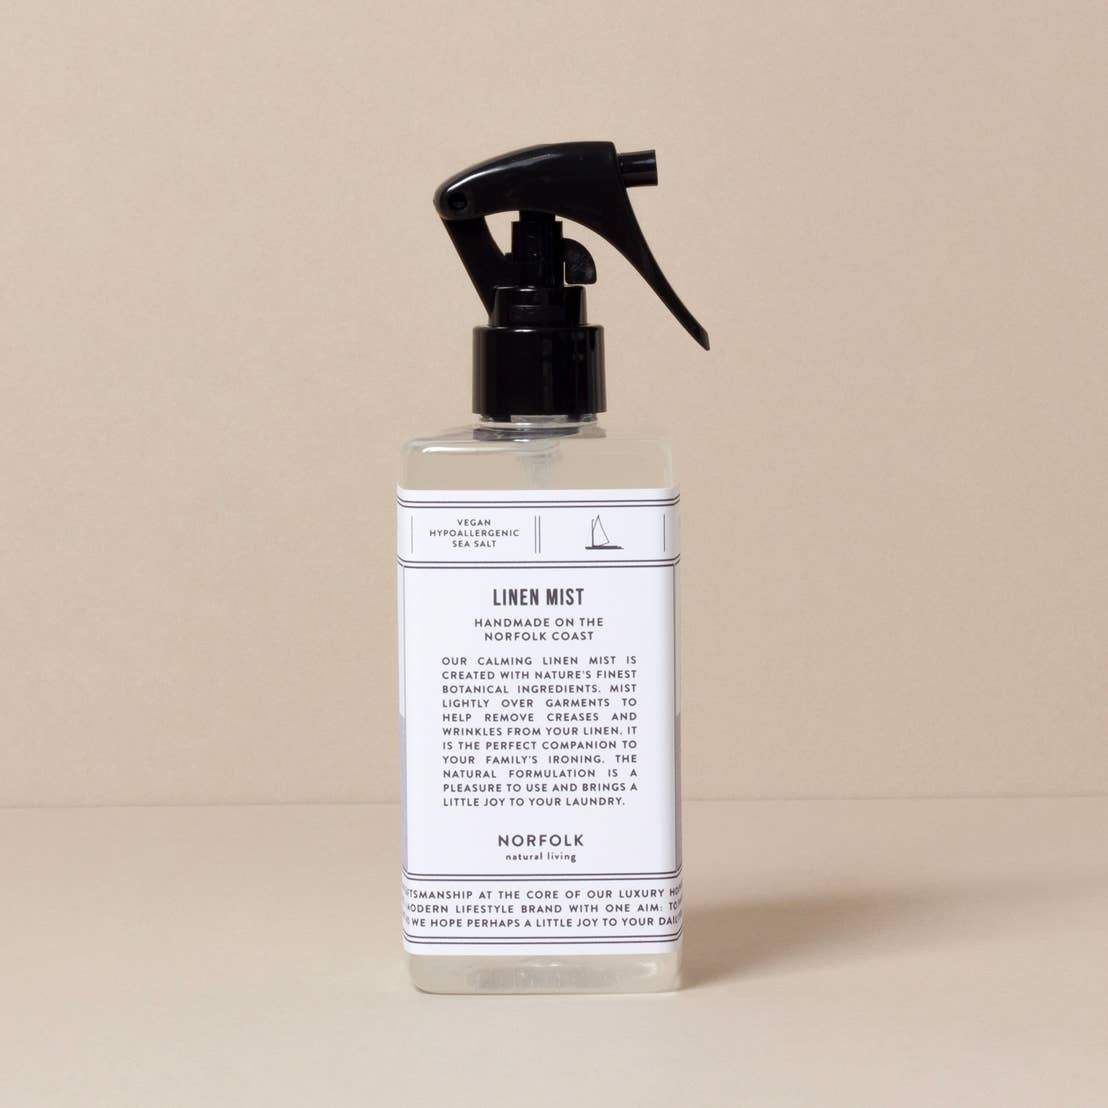 A bottle of Norfolk Natural Living Coastal Linen Mist room spray with a spray nozzle, labeled with details about its scent and ingredients, against a plain beige background.